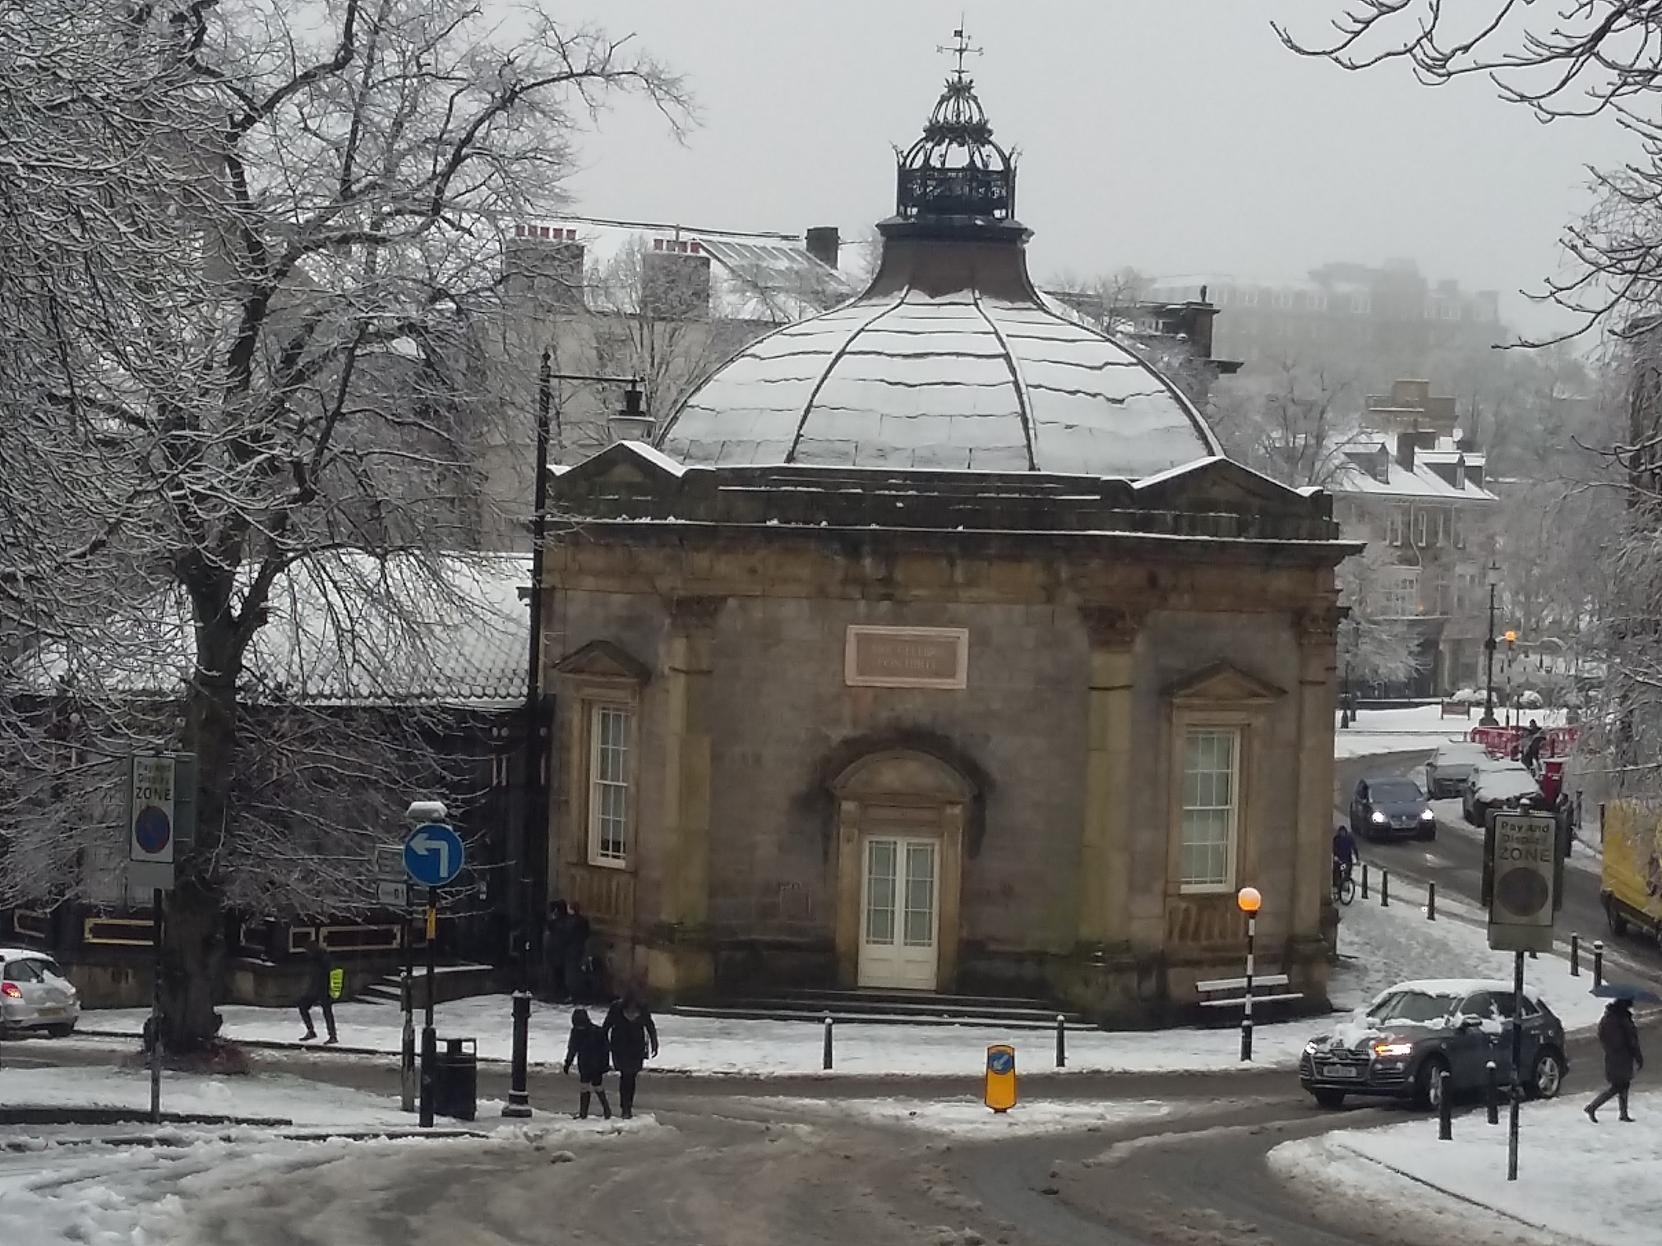 Snowy conditions around the Pump Room in the town centre.